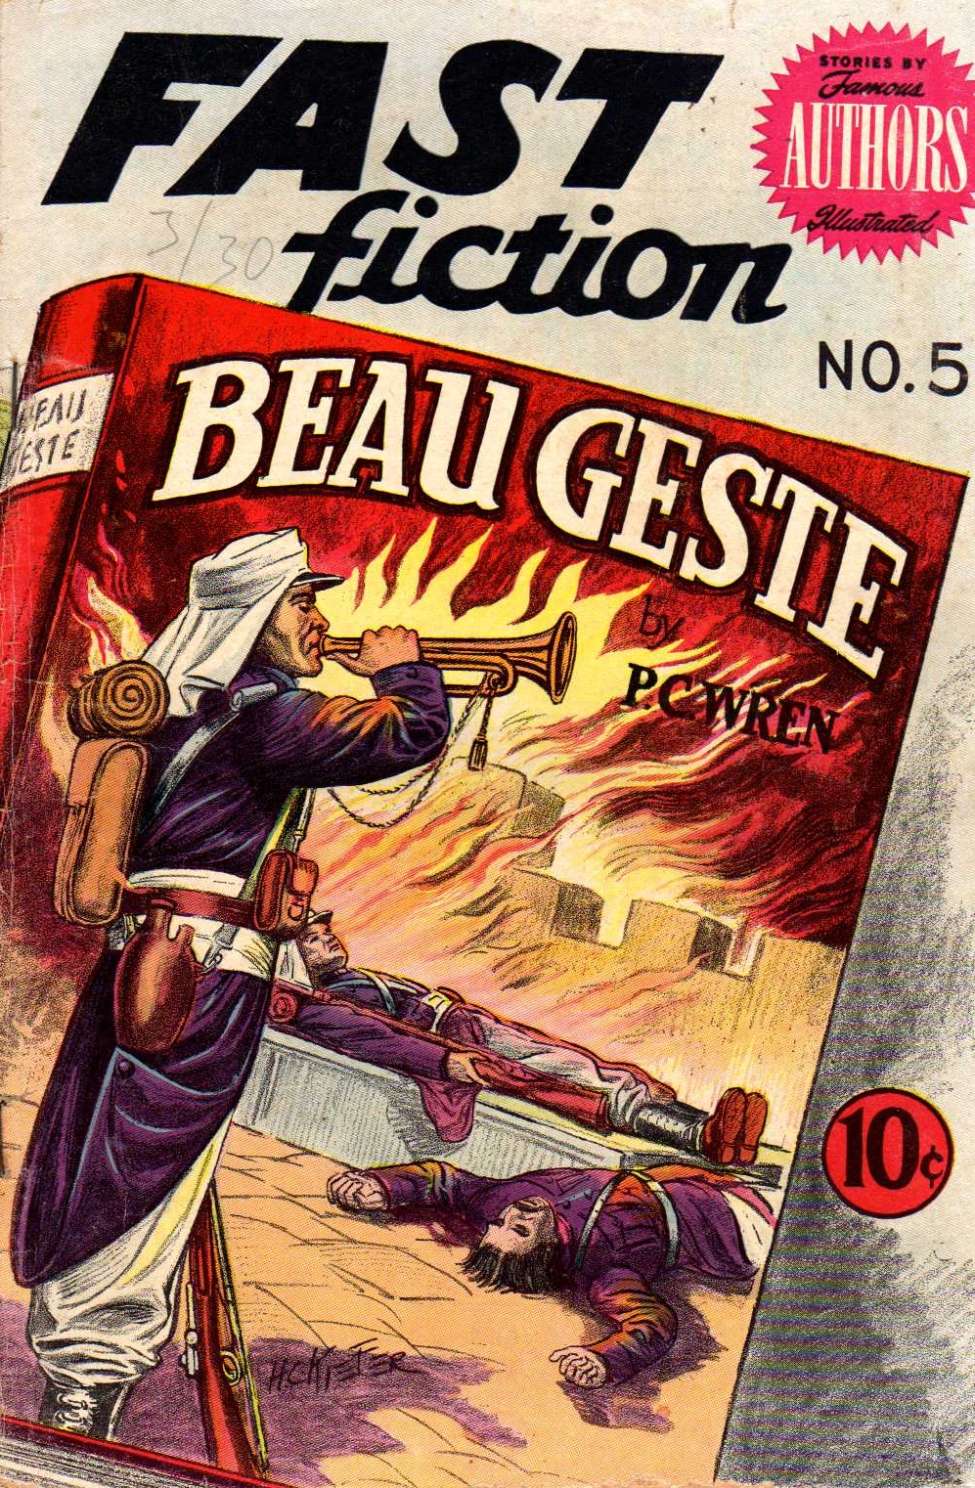 Book Cover For Fast Fiction 5 - Beau Geste